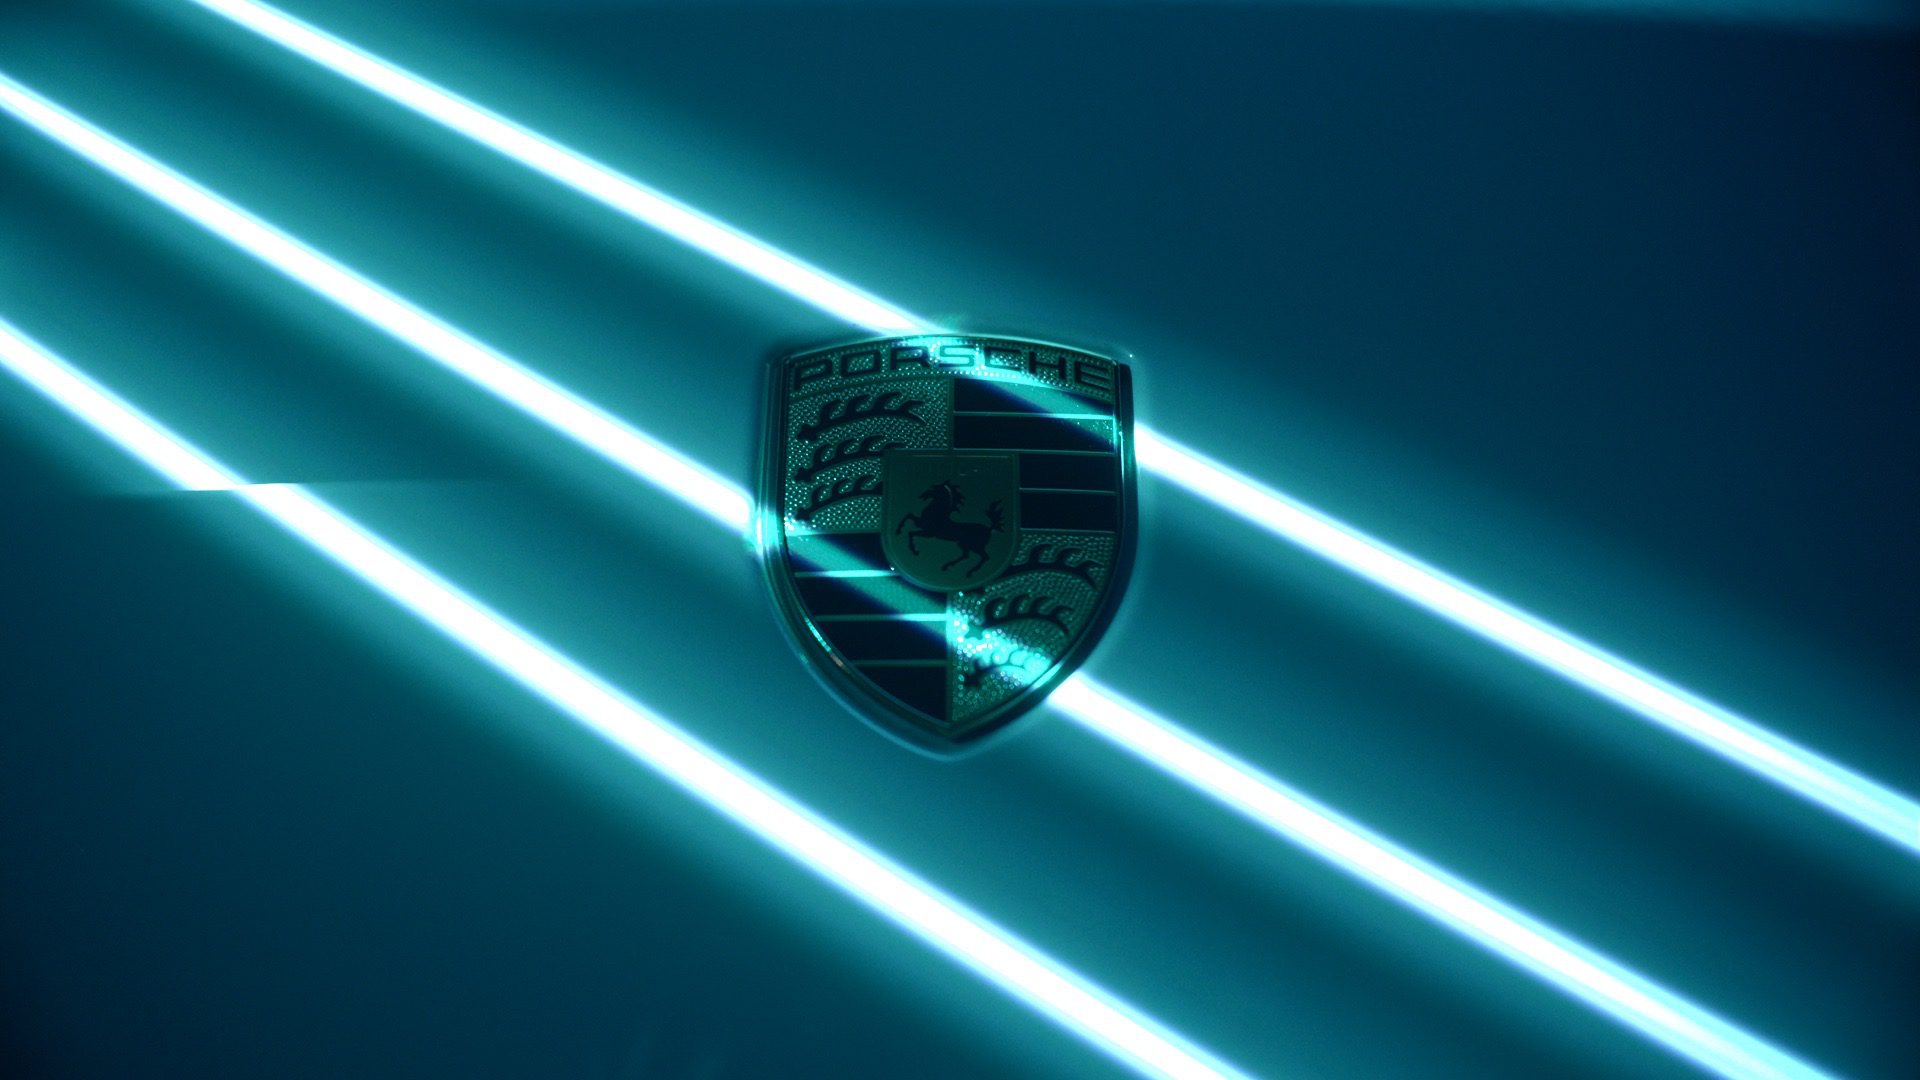 Porsche badge on the frozen blue colourway of the new Taycan